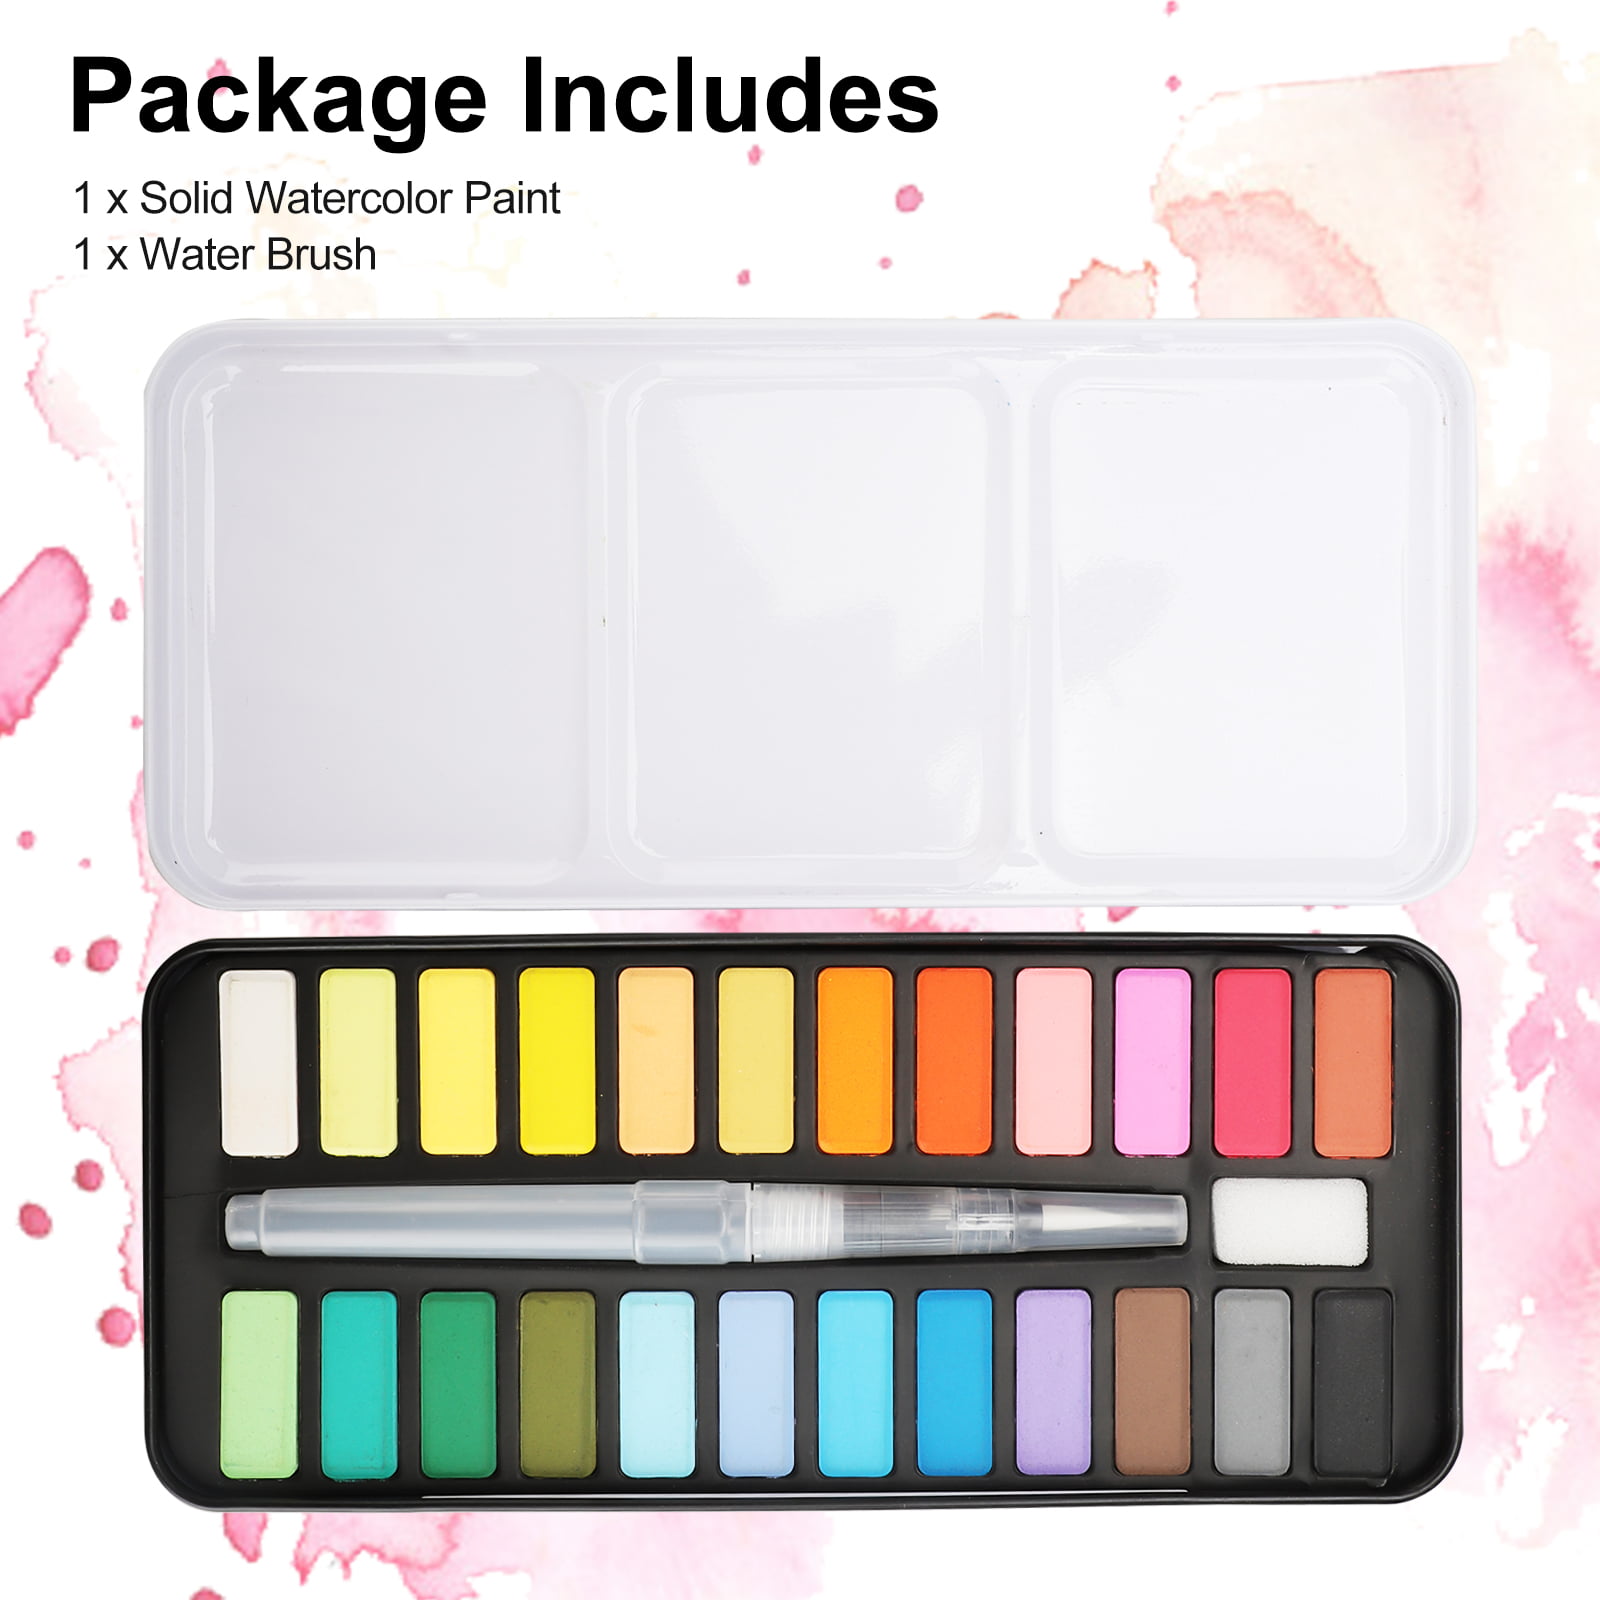 Jetec 24 Set Valentine's Day Watercolor Paint Set Includes 8.98 x 5.91 Inch  Paint Palette for Kids with 12 Bright Water Colors Valentines Cards and